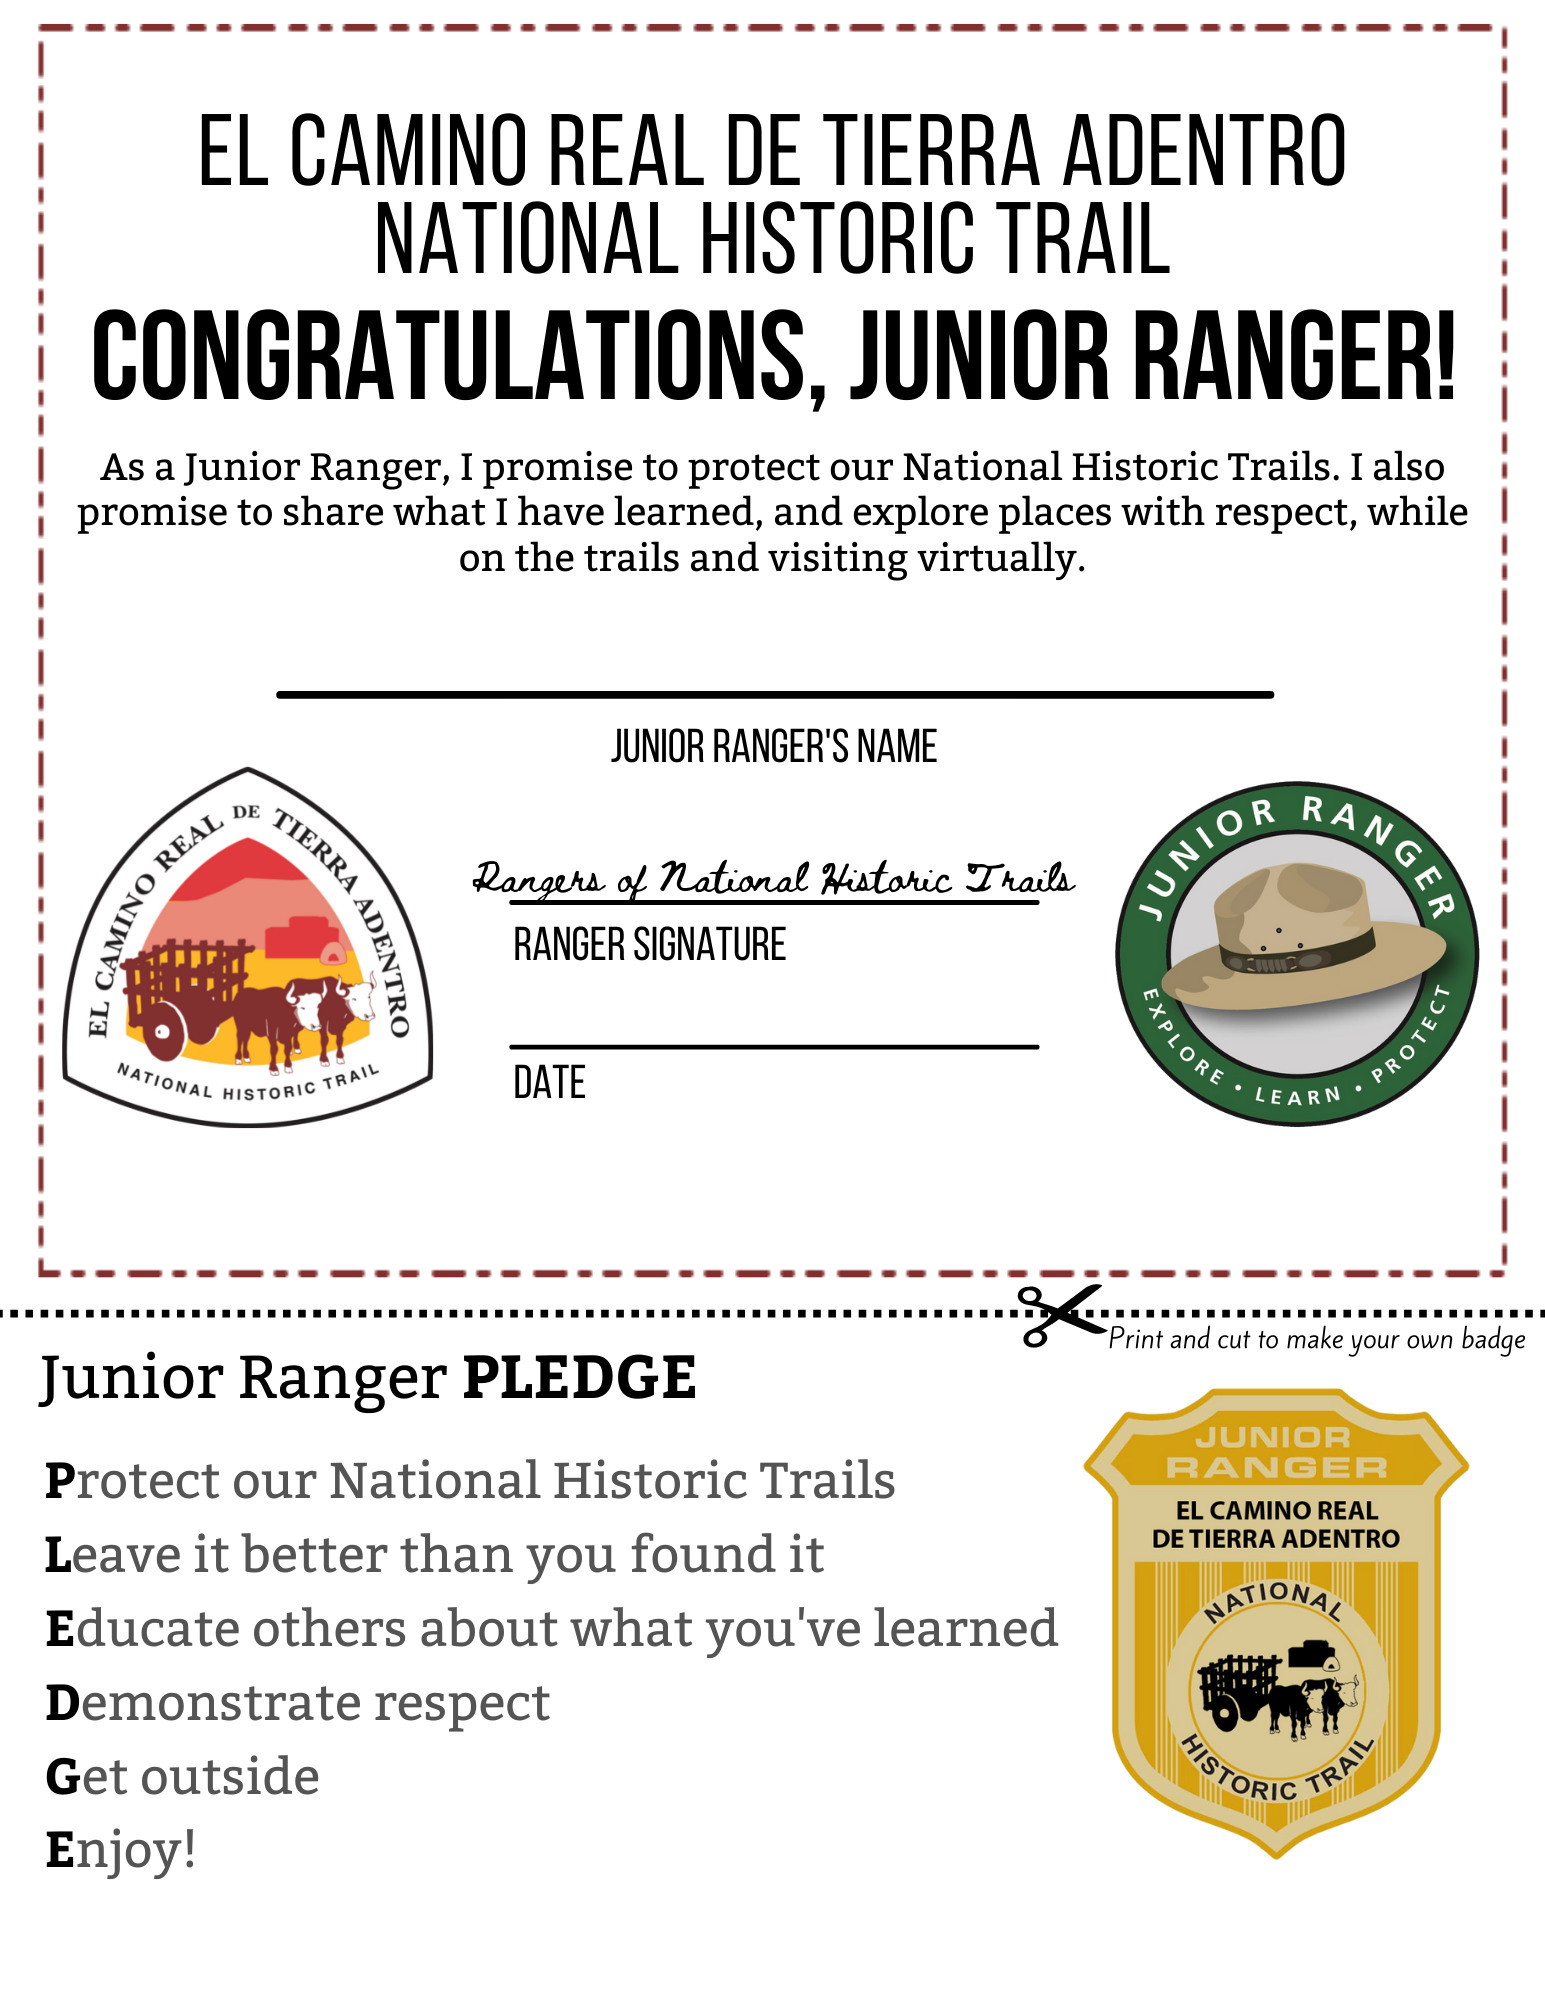 A certificate with a junior ranger badge image.